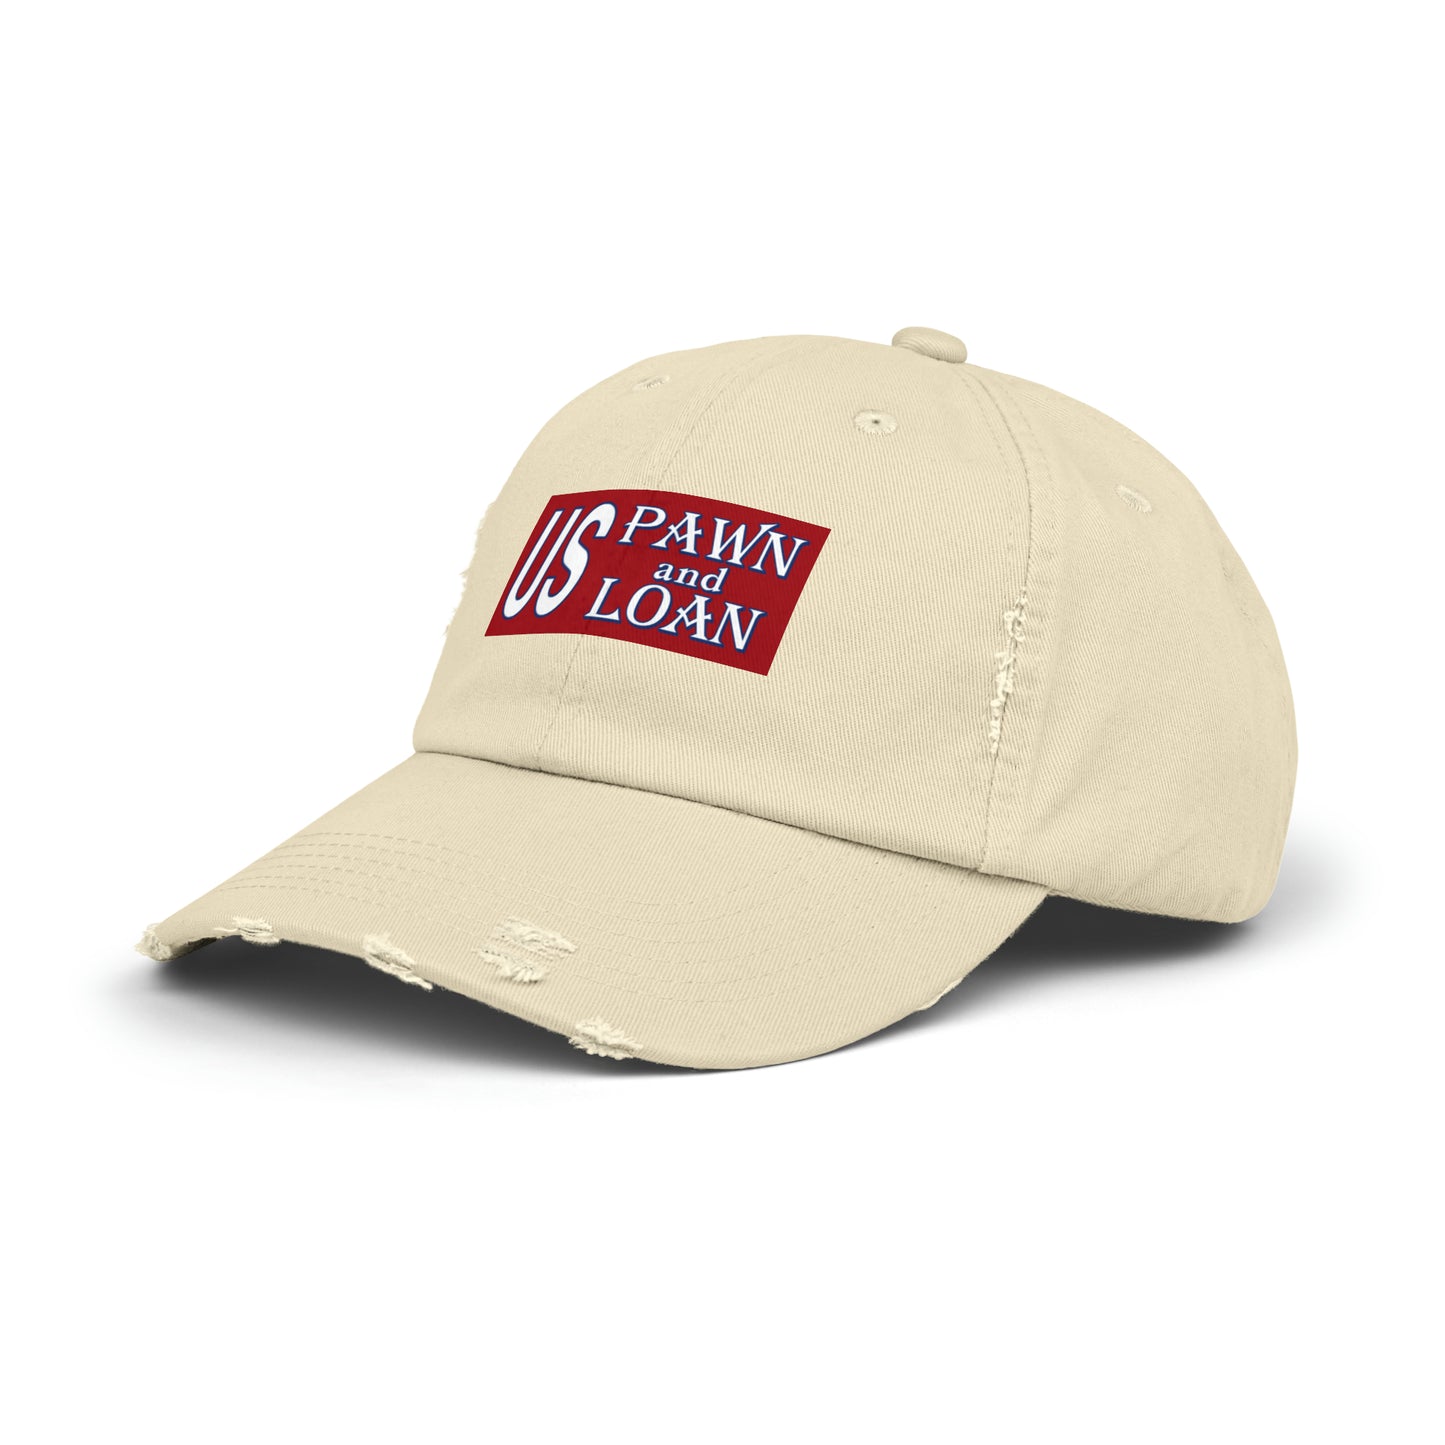 Unisex Distressed Cap | US Pawn and Loan